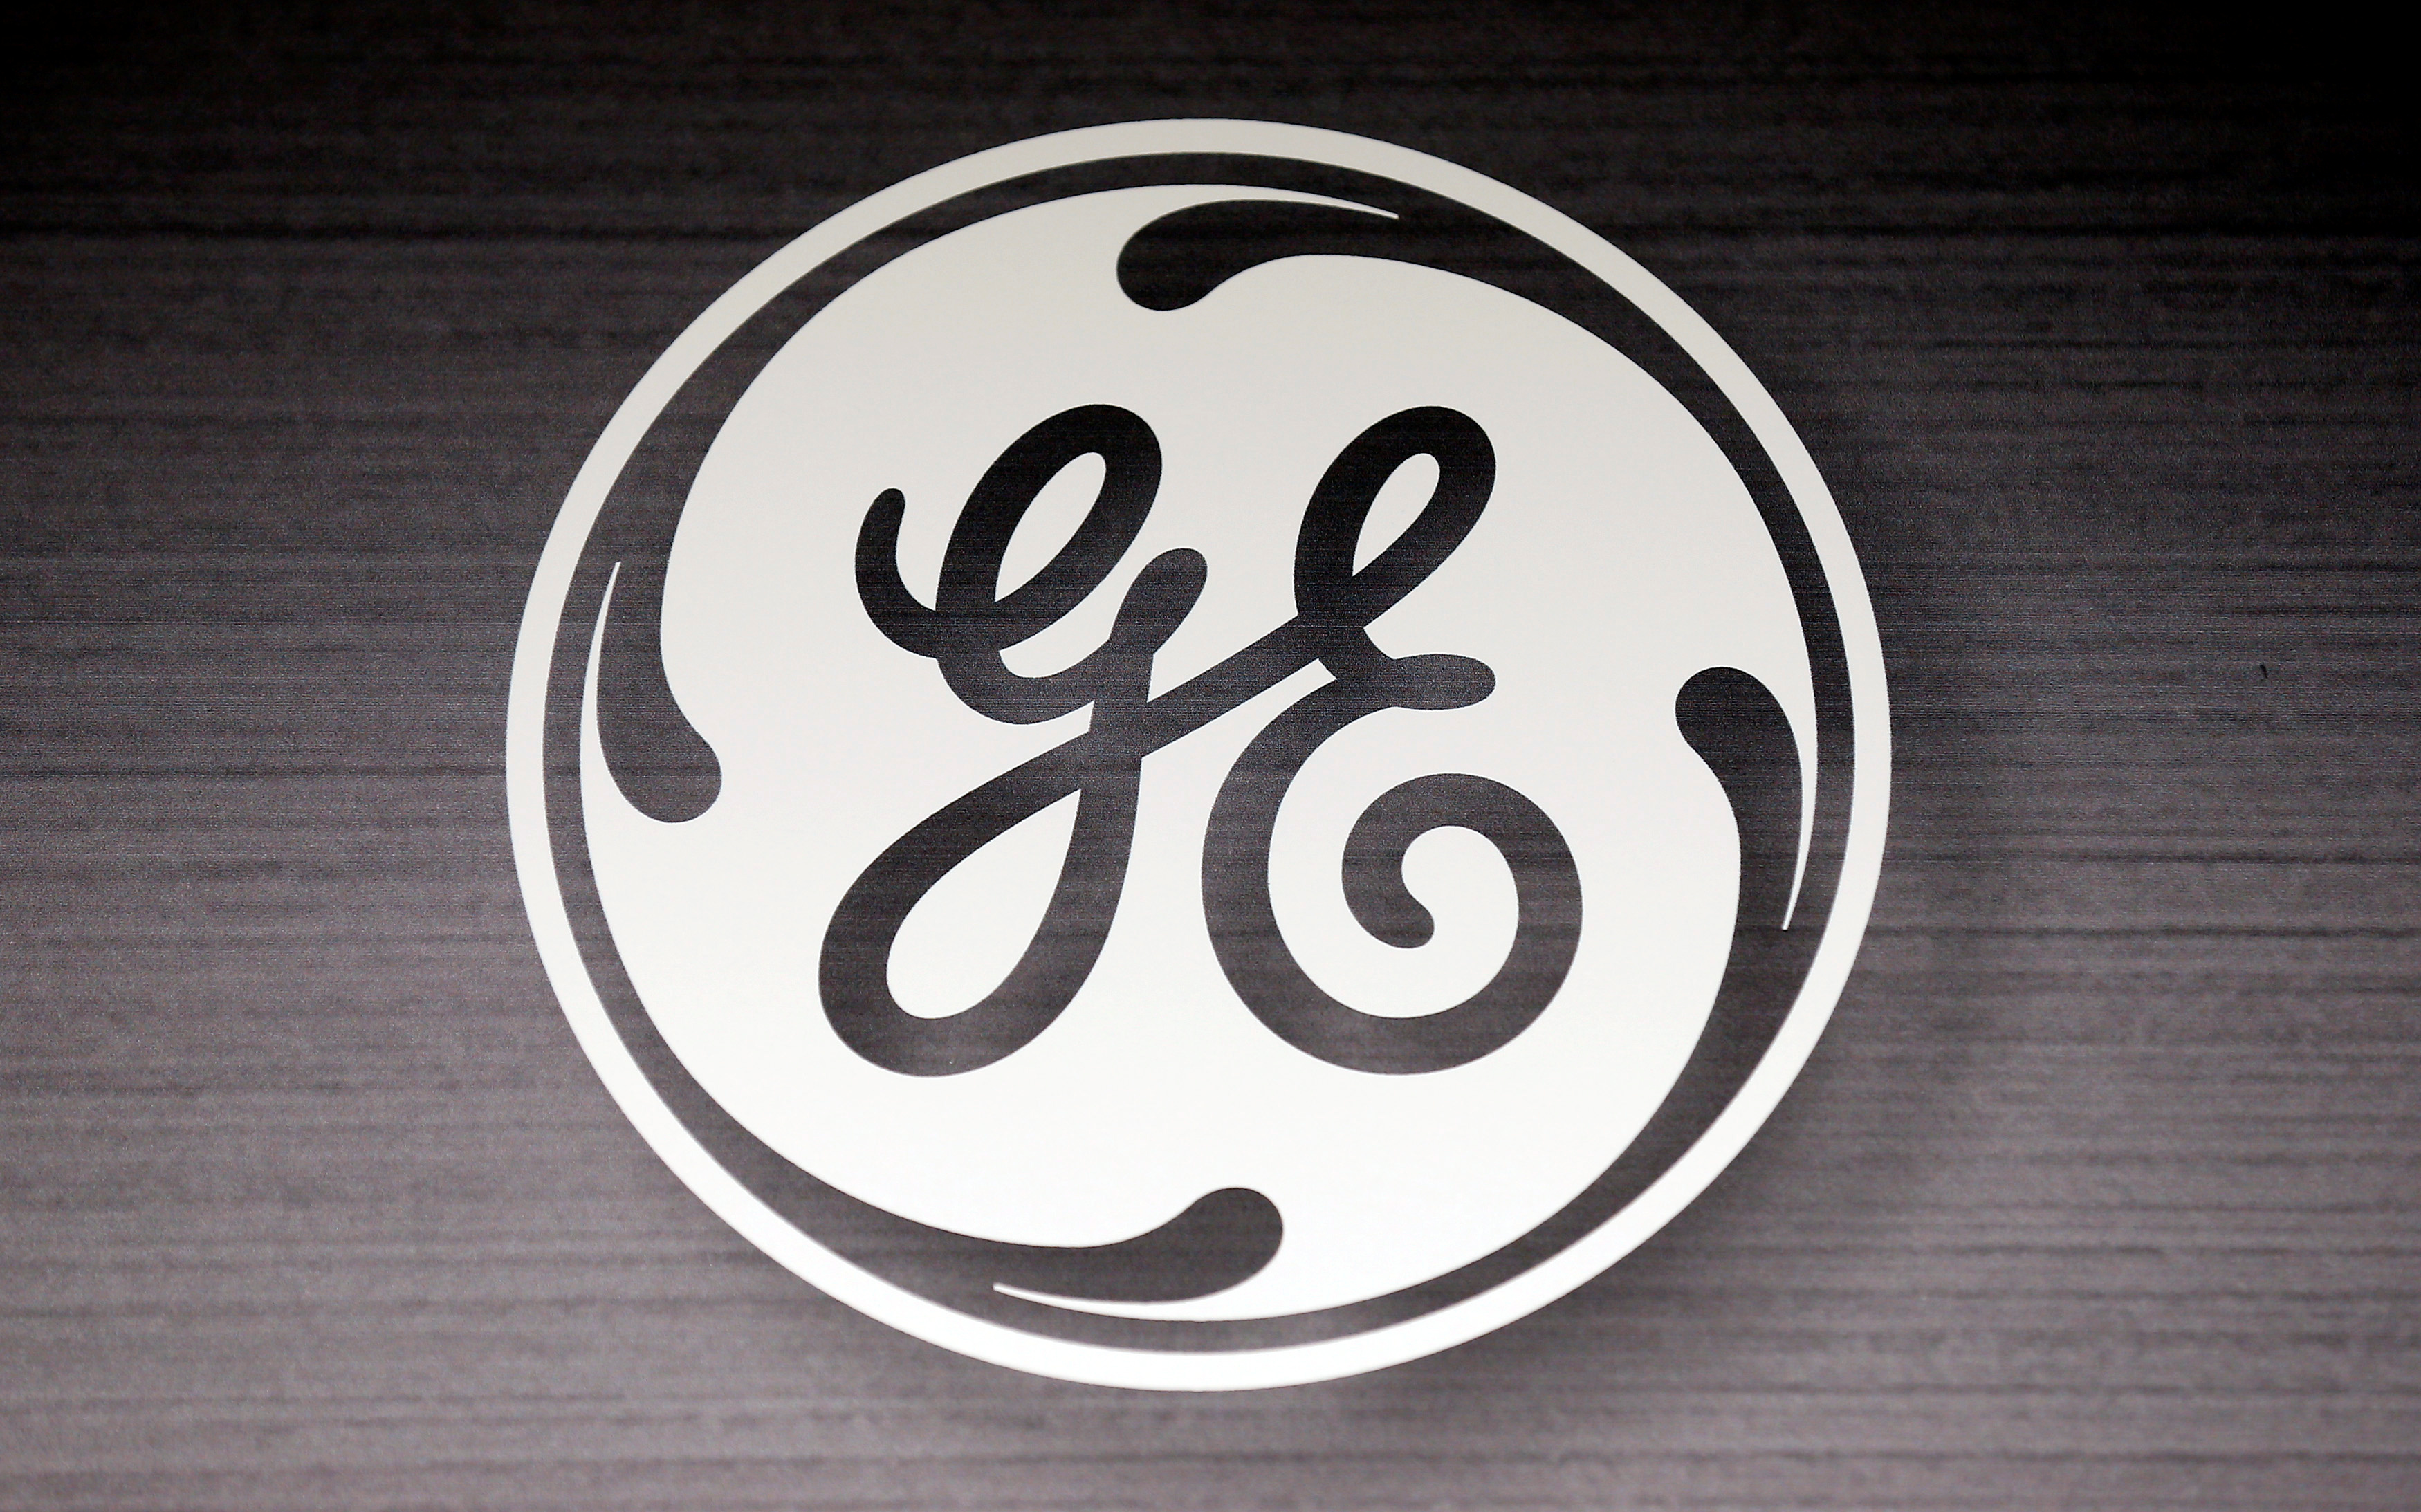 The General Electric logo is seen in a Sears store in Schaumburg, Illinois, September 8, 2014. Sweden's Electrolux AB said on Monday it would double U.S. sales by paying $3.3 billion in cash for General Electric Co's appliances business in its biggest ever deal, giving it the scale to go head-to-head with larger rival Whirlpool.  REUTERS/Jim Young 